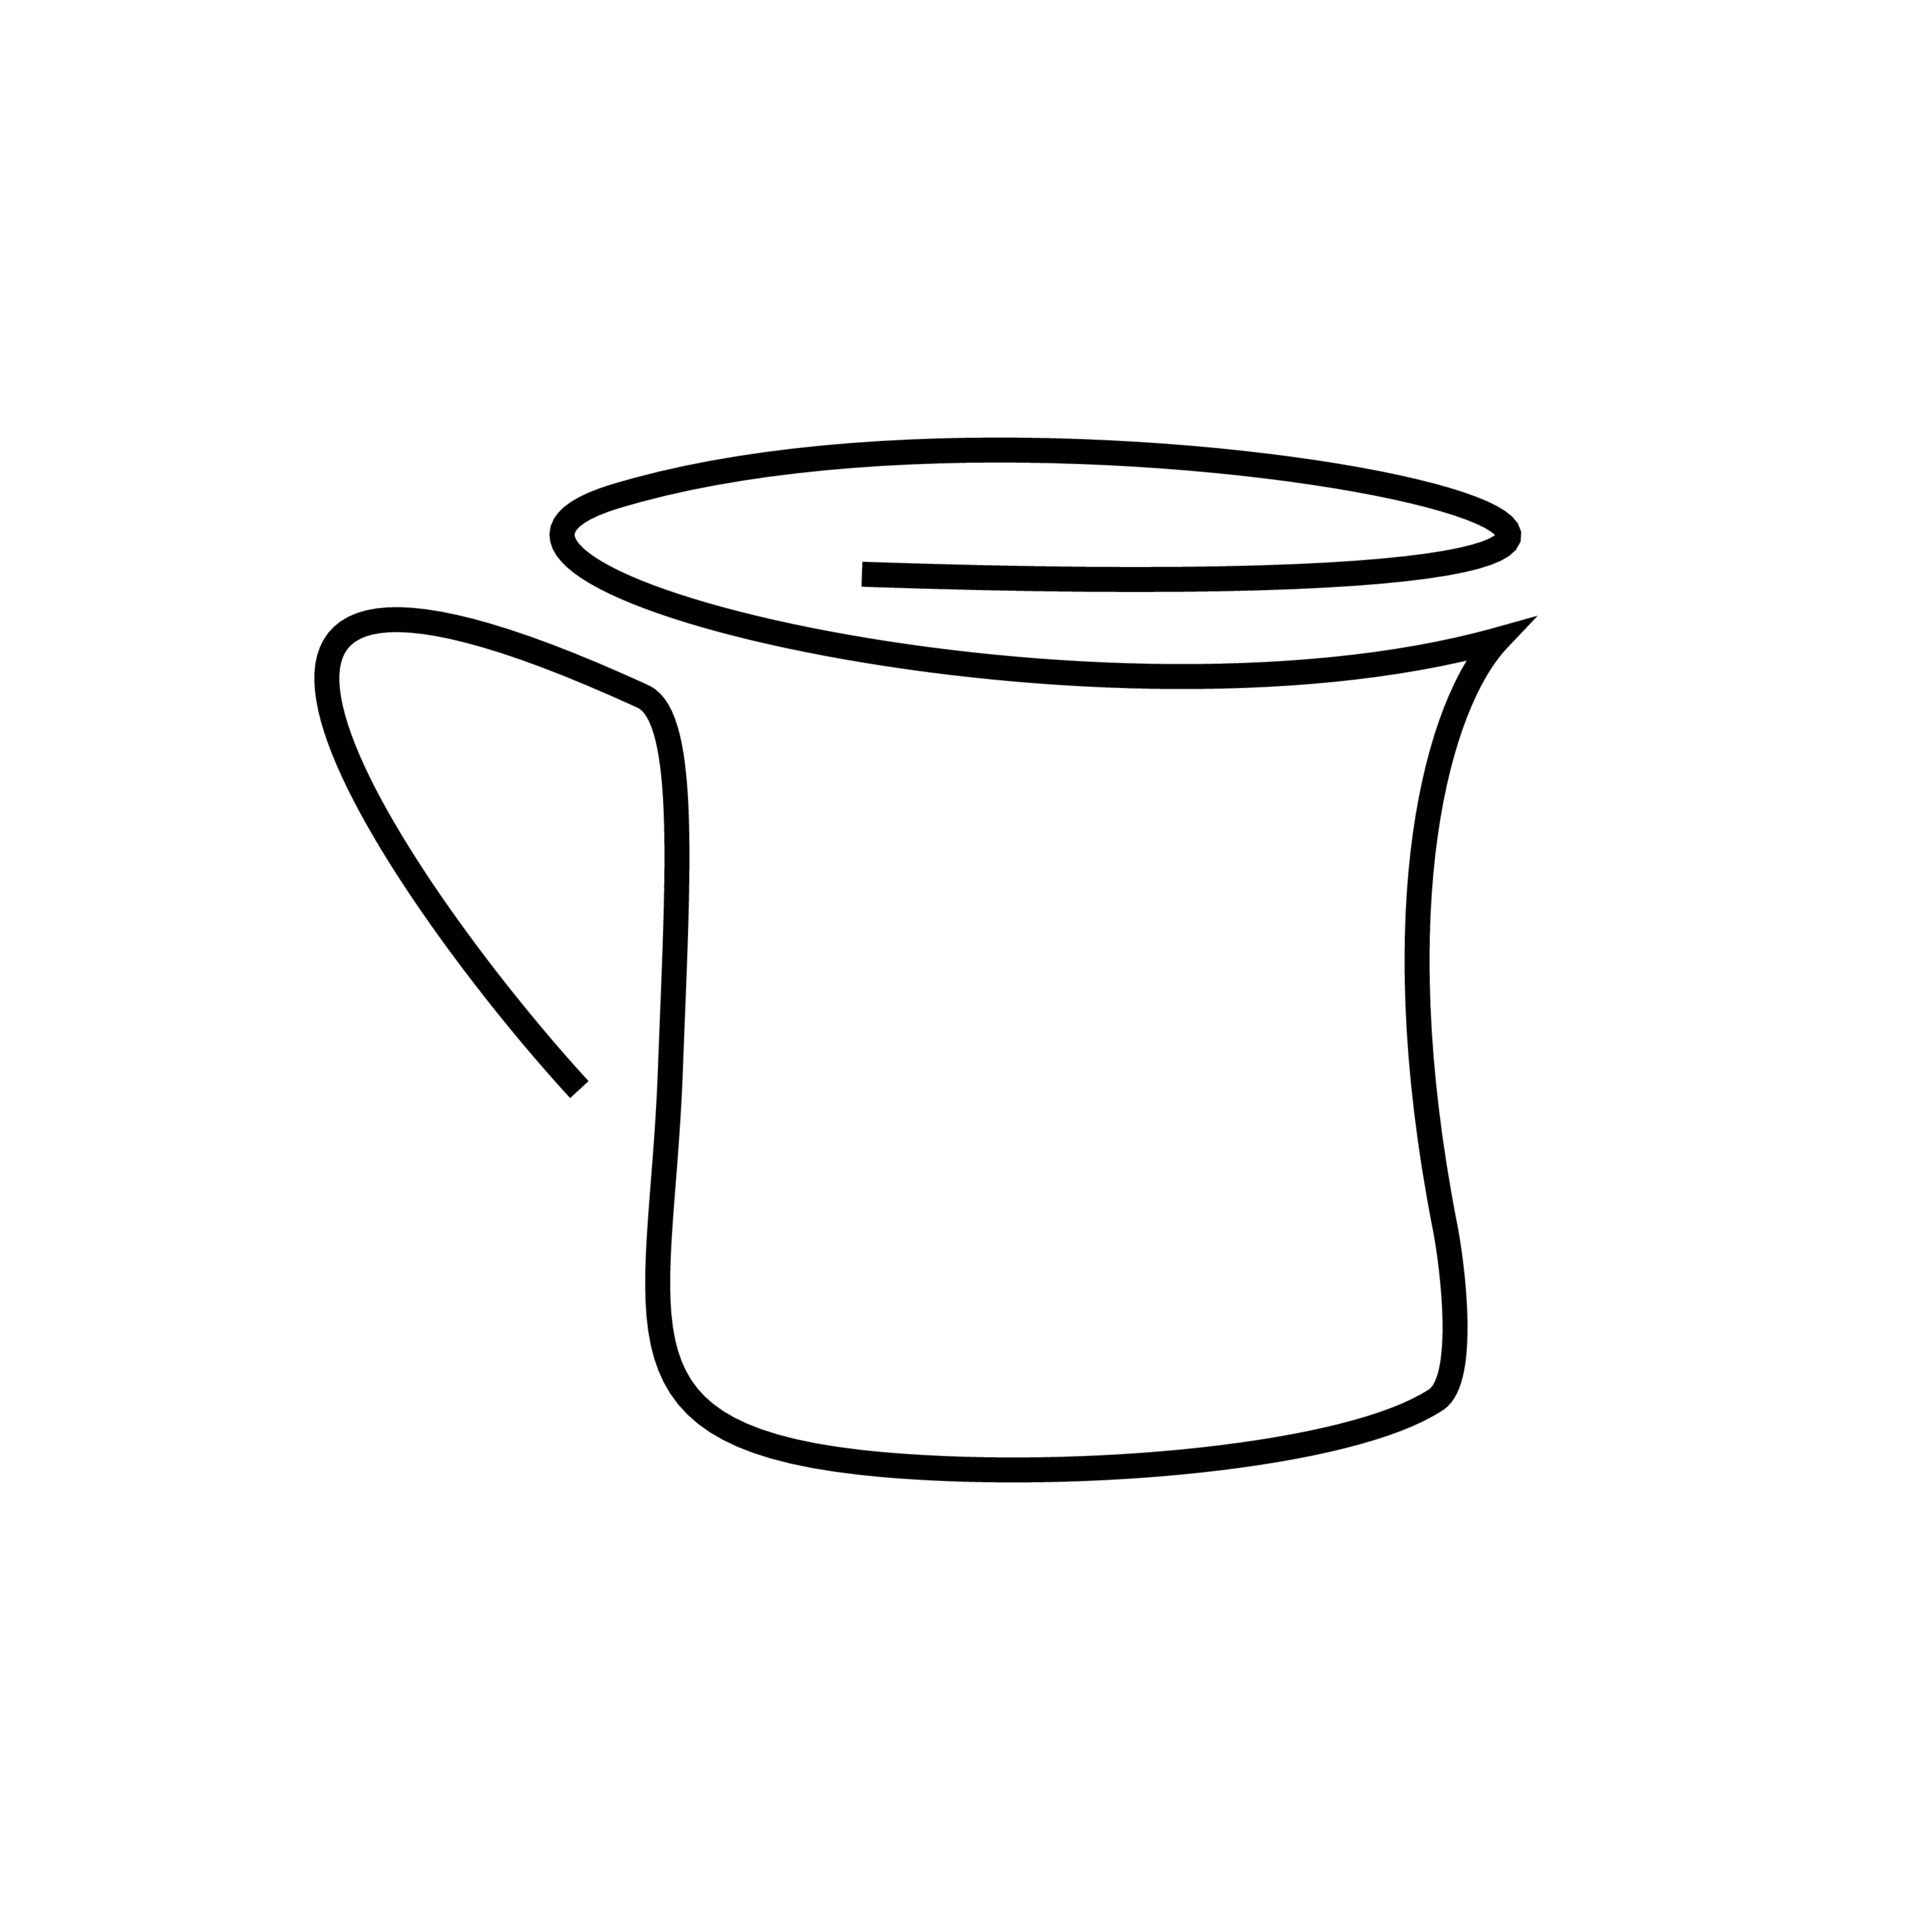 Jug coffee or tea canister pitcher simple logo Vector Image